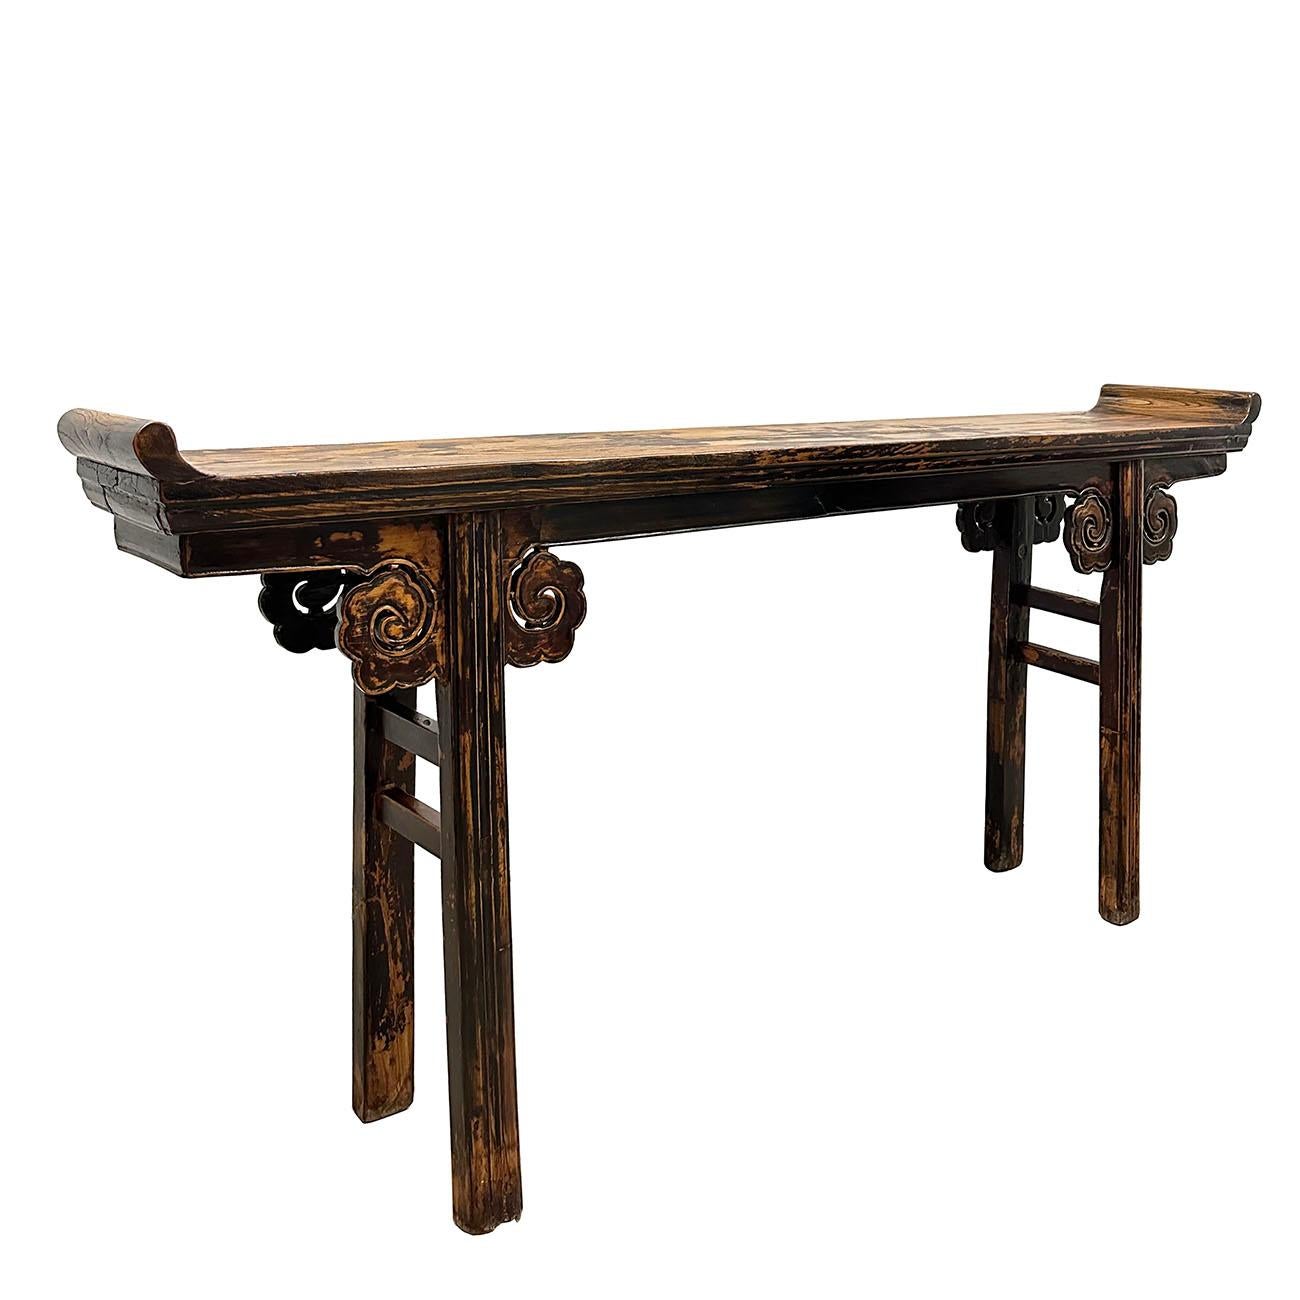 This Antique Open Carved Altar table from China was made in 19th century and still maintained very good condition. It shows the traditional style of Northern China's cultural. This Chinese antique altar table was made from solid wood with open